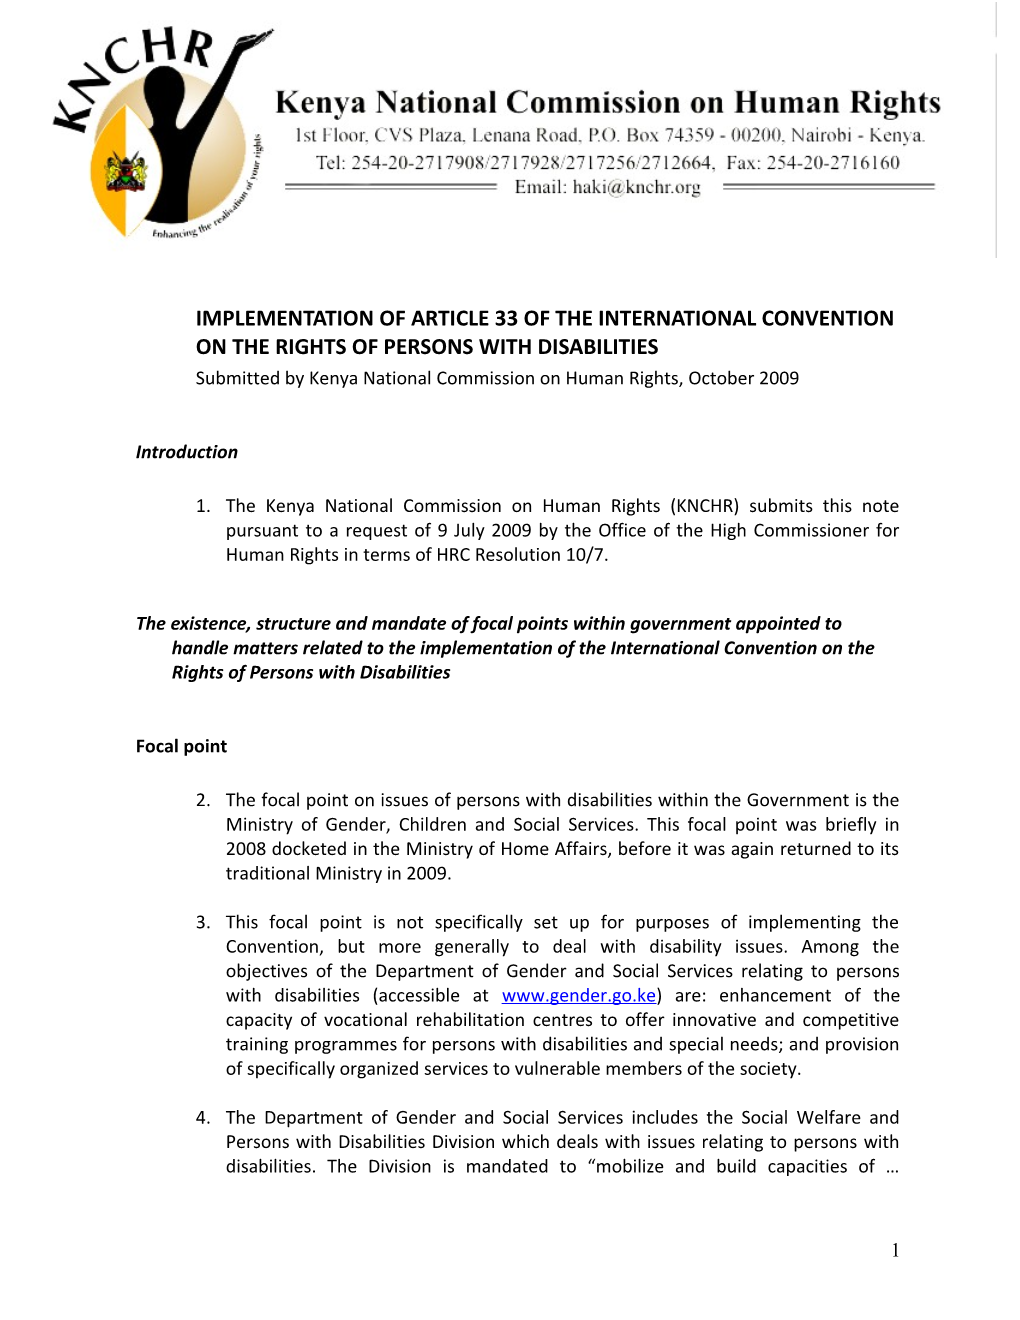 Implementation of Article 33 of the International Convention on the Rights of Persons